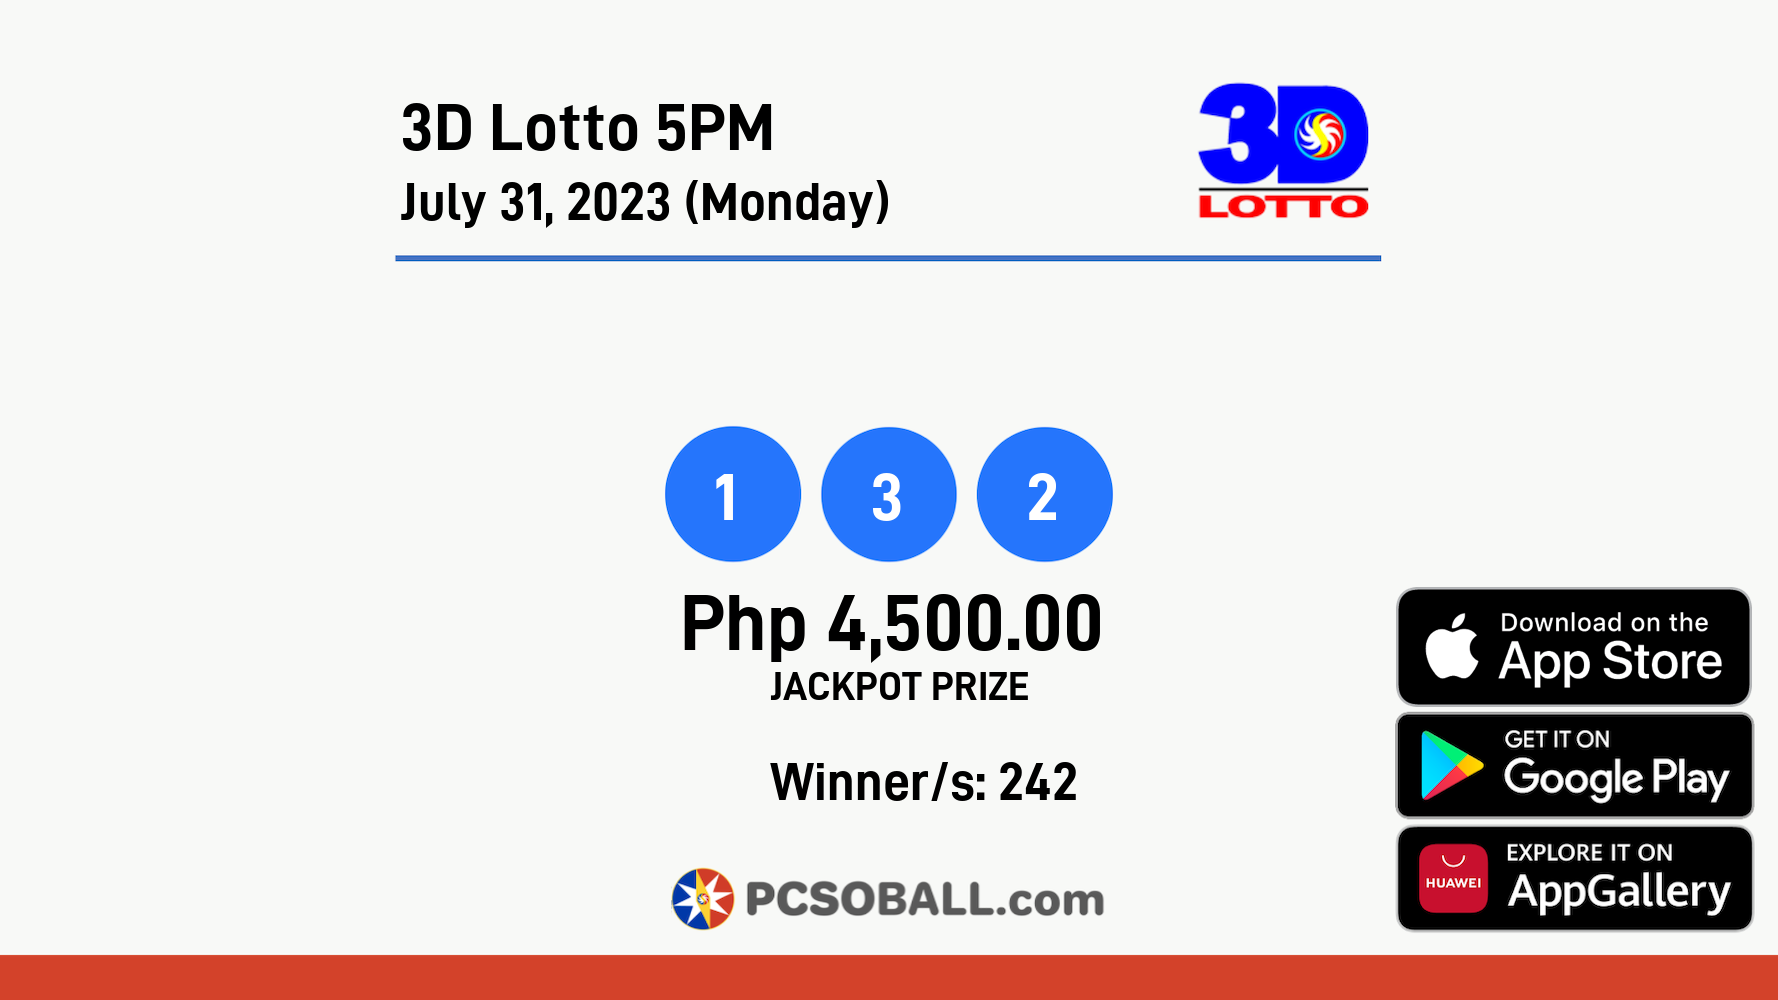 3D Lotto 5PM July 31, 2023 (Monday) Result